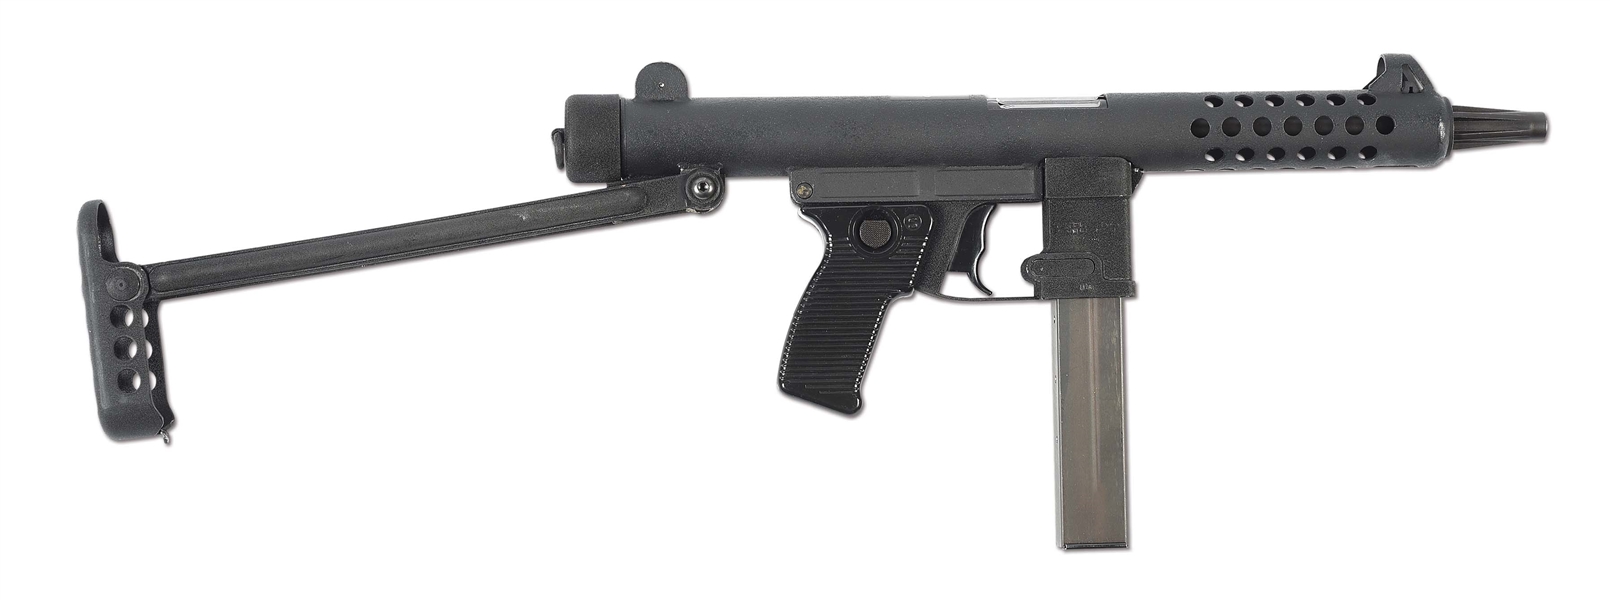 (N) EXCEPTIONALLY SCARCE FULLY TRANSFERABLE LA FRANCE SPECIALTIES STAR MODEL Z-70L SUBMACHINE GUN WITH BOX (FULLY TRANSFERABLE).